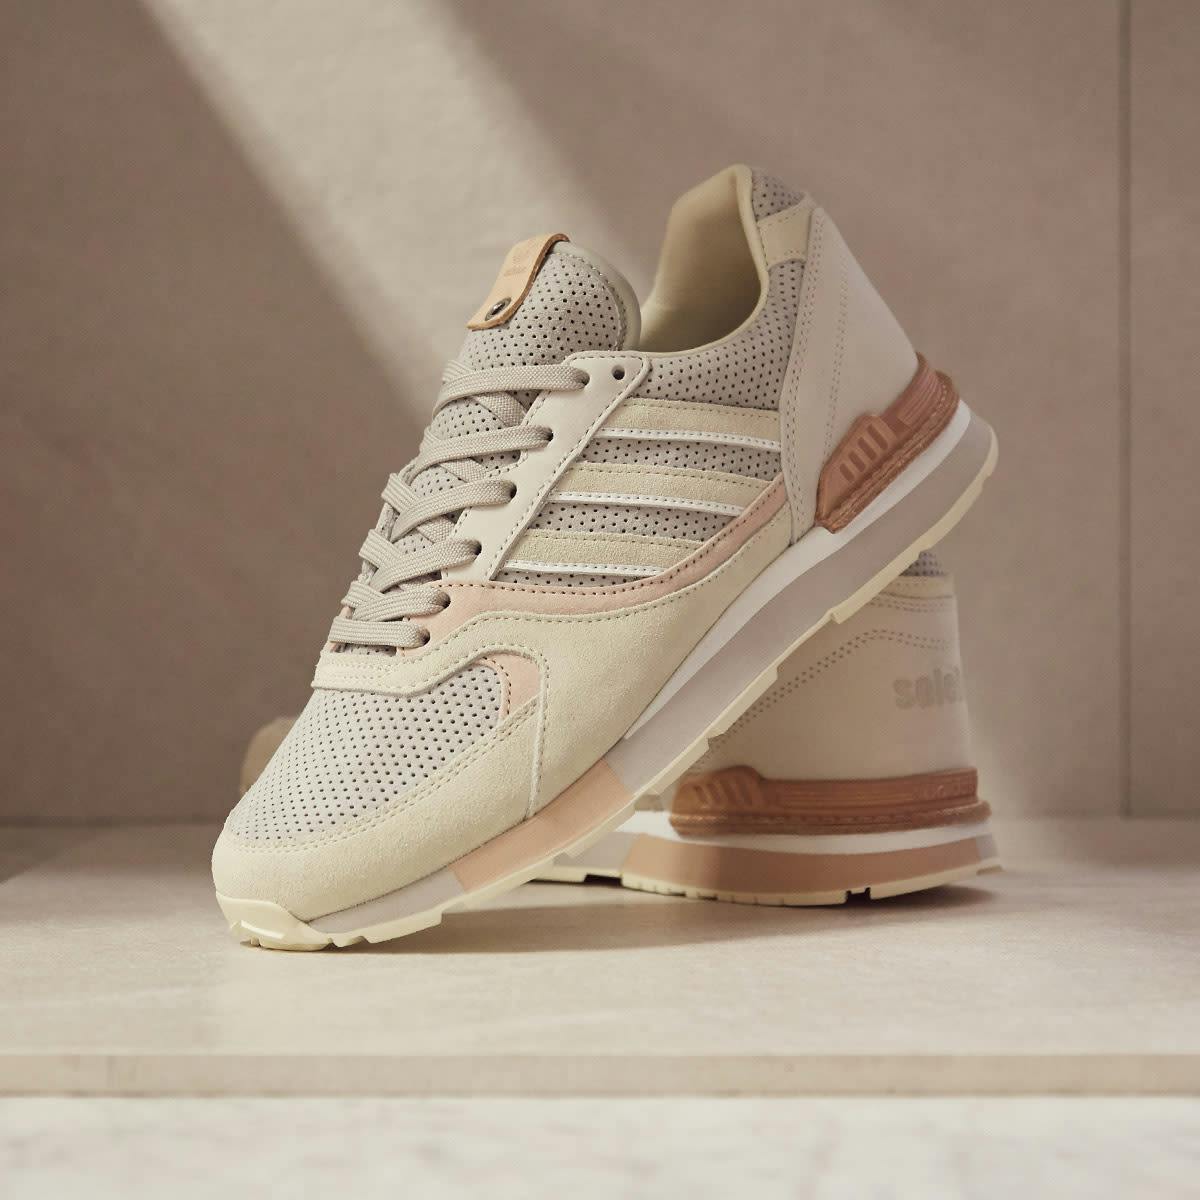 Comprimir operación hará adidas x Solebox SS18 - Register Now on END. (US) Launches | END. (US)